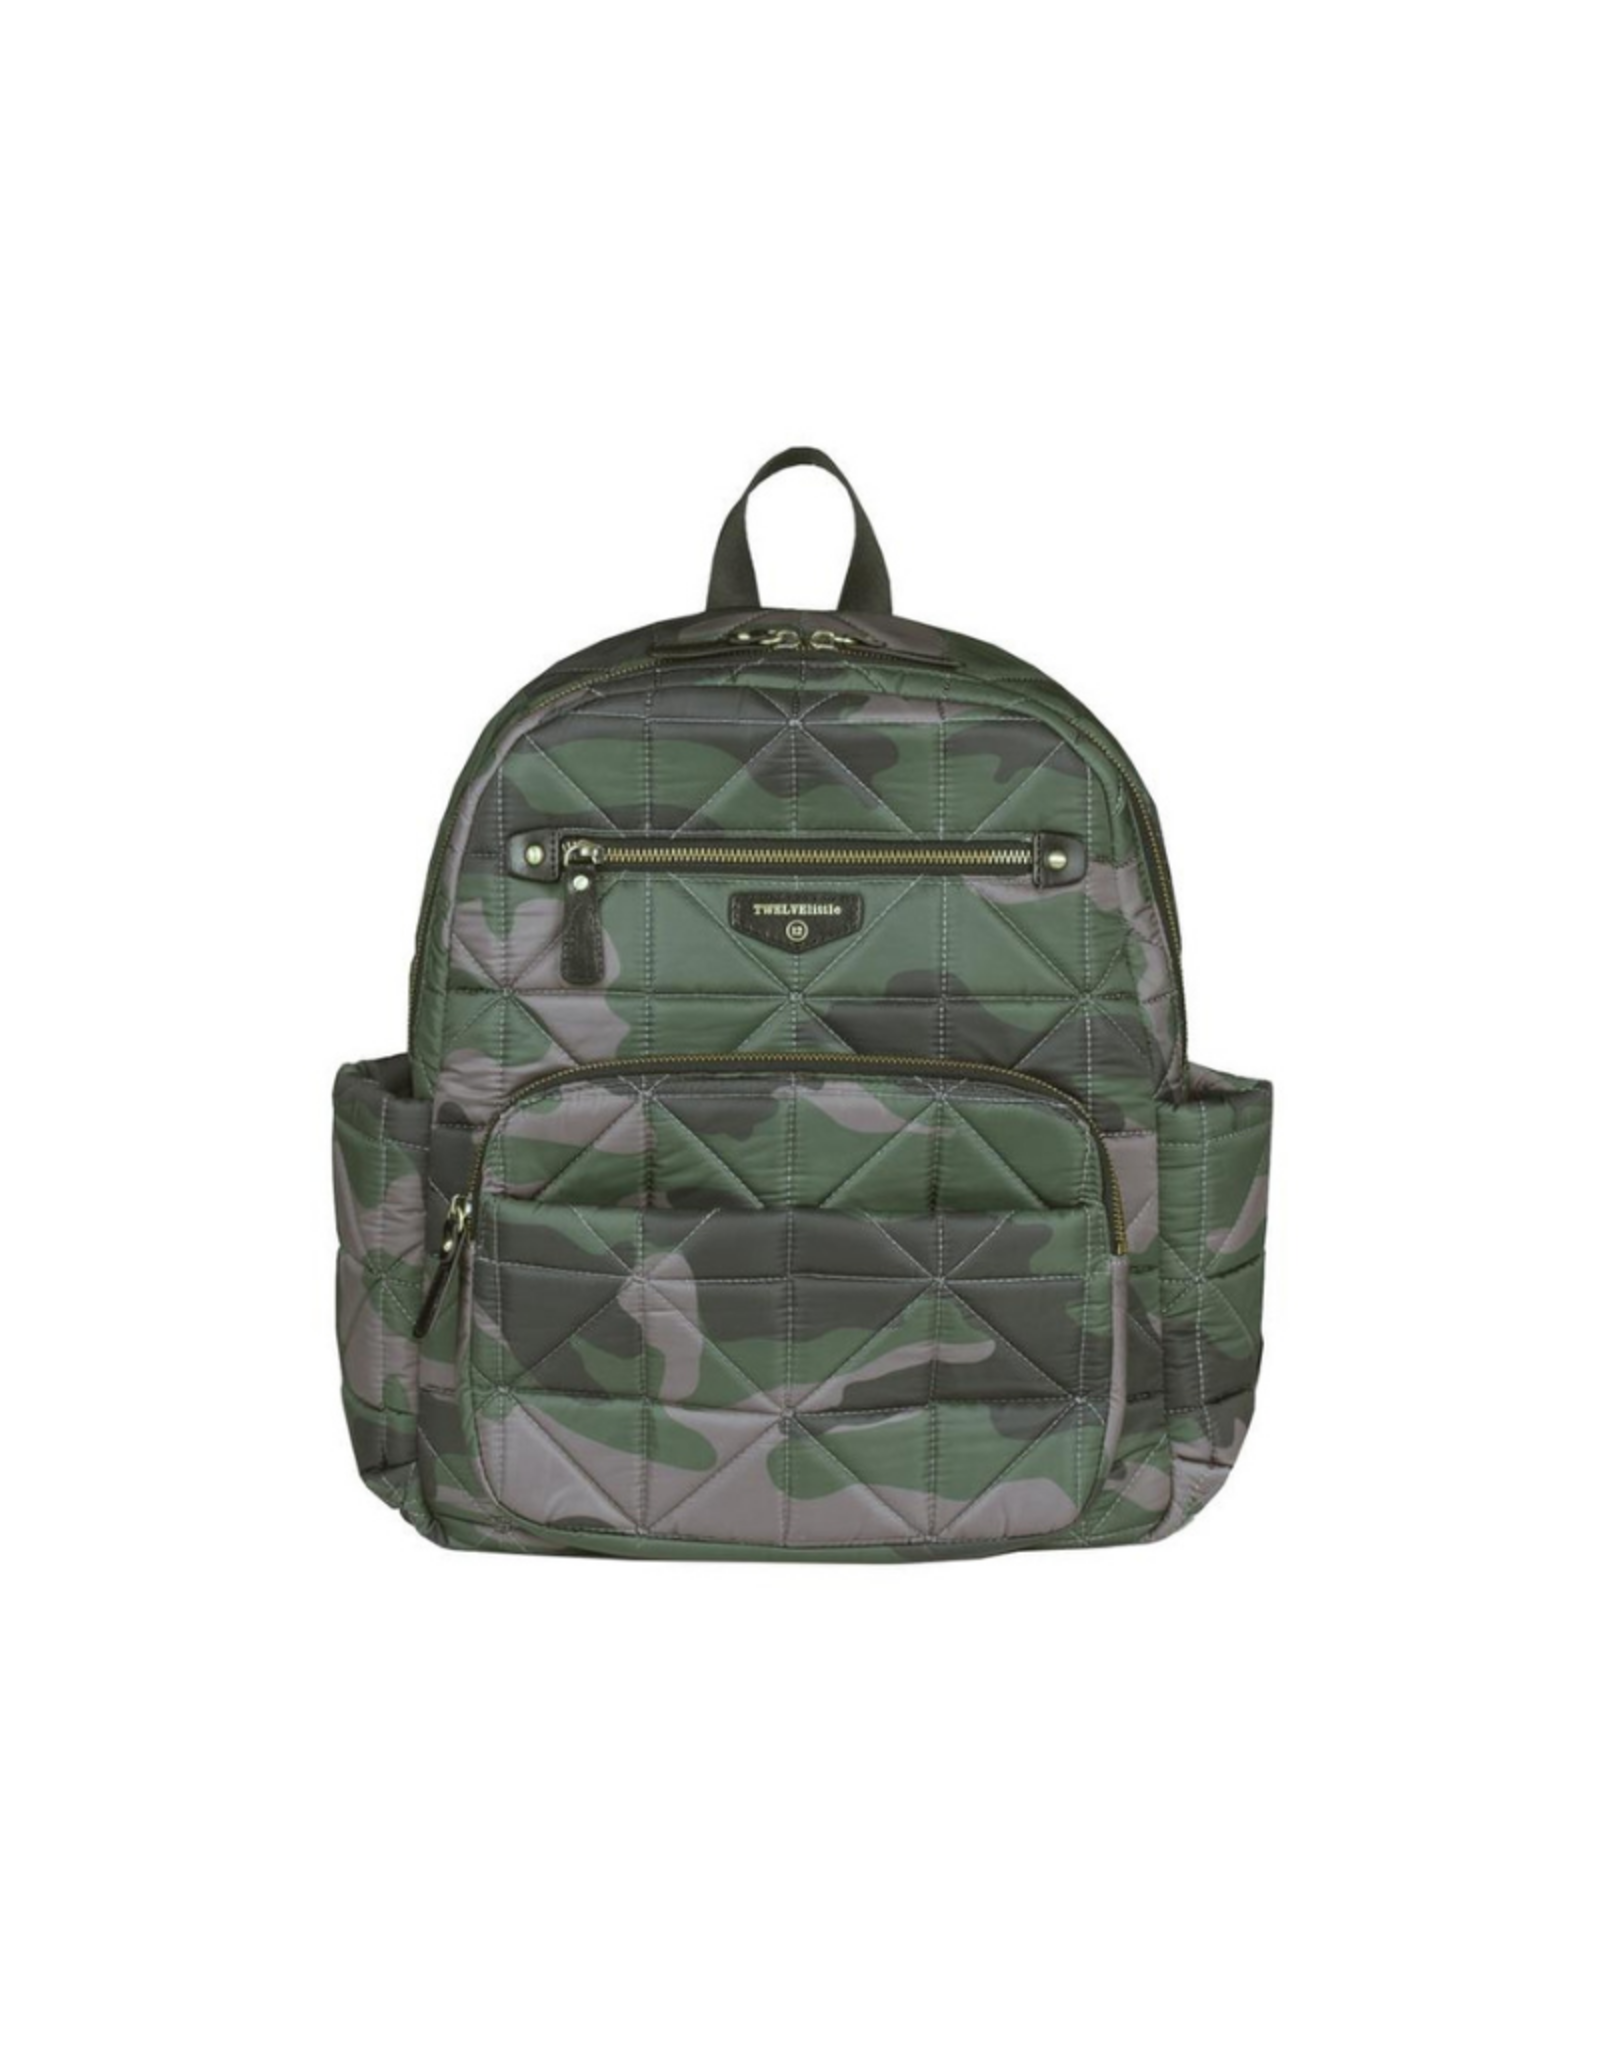 Tigerlily Little Companion Backpack